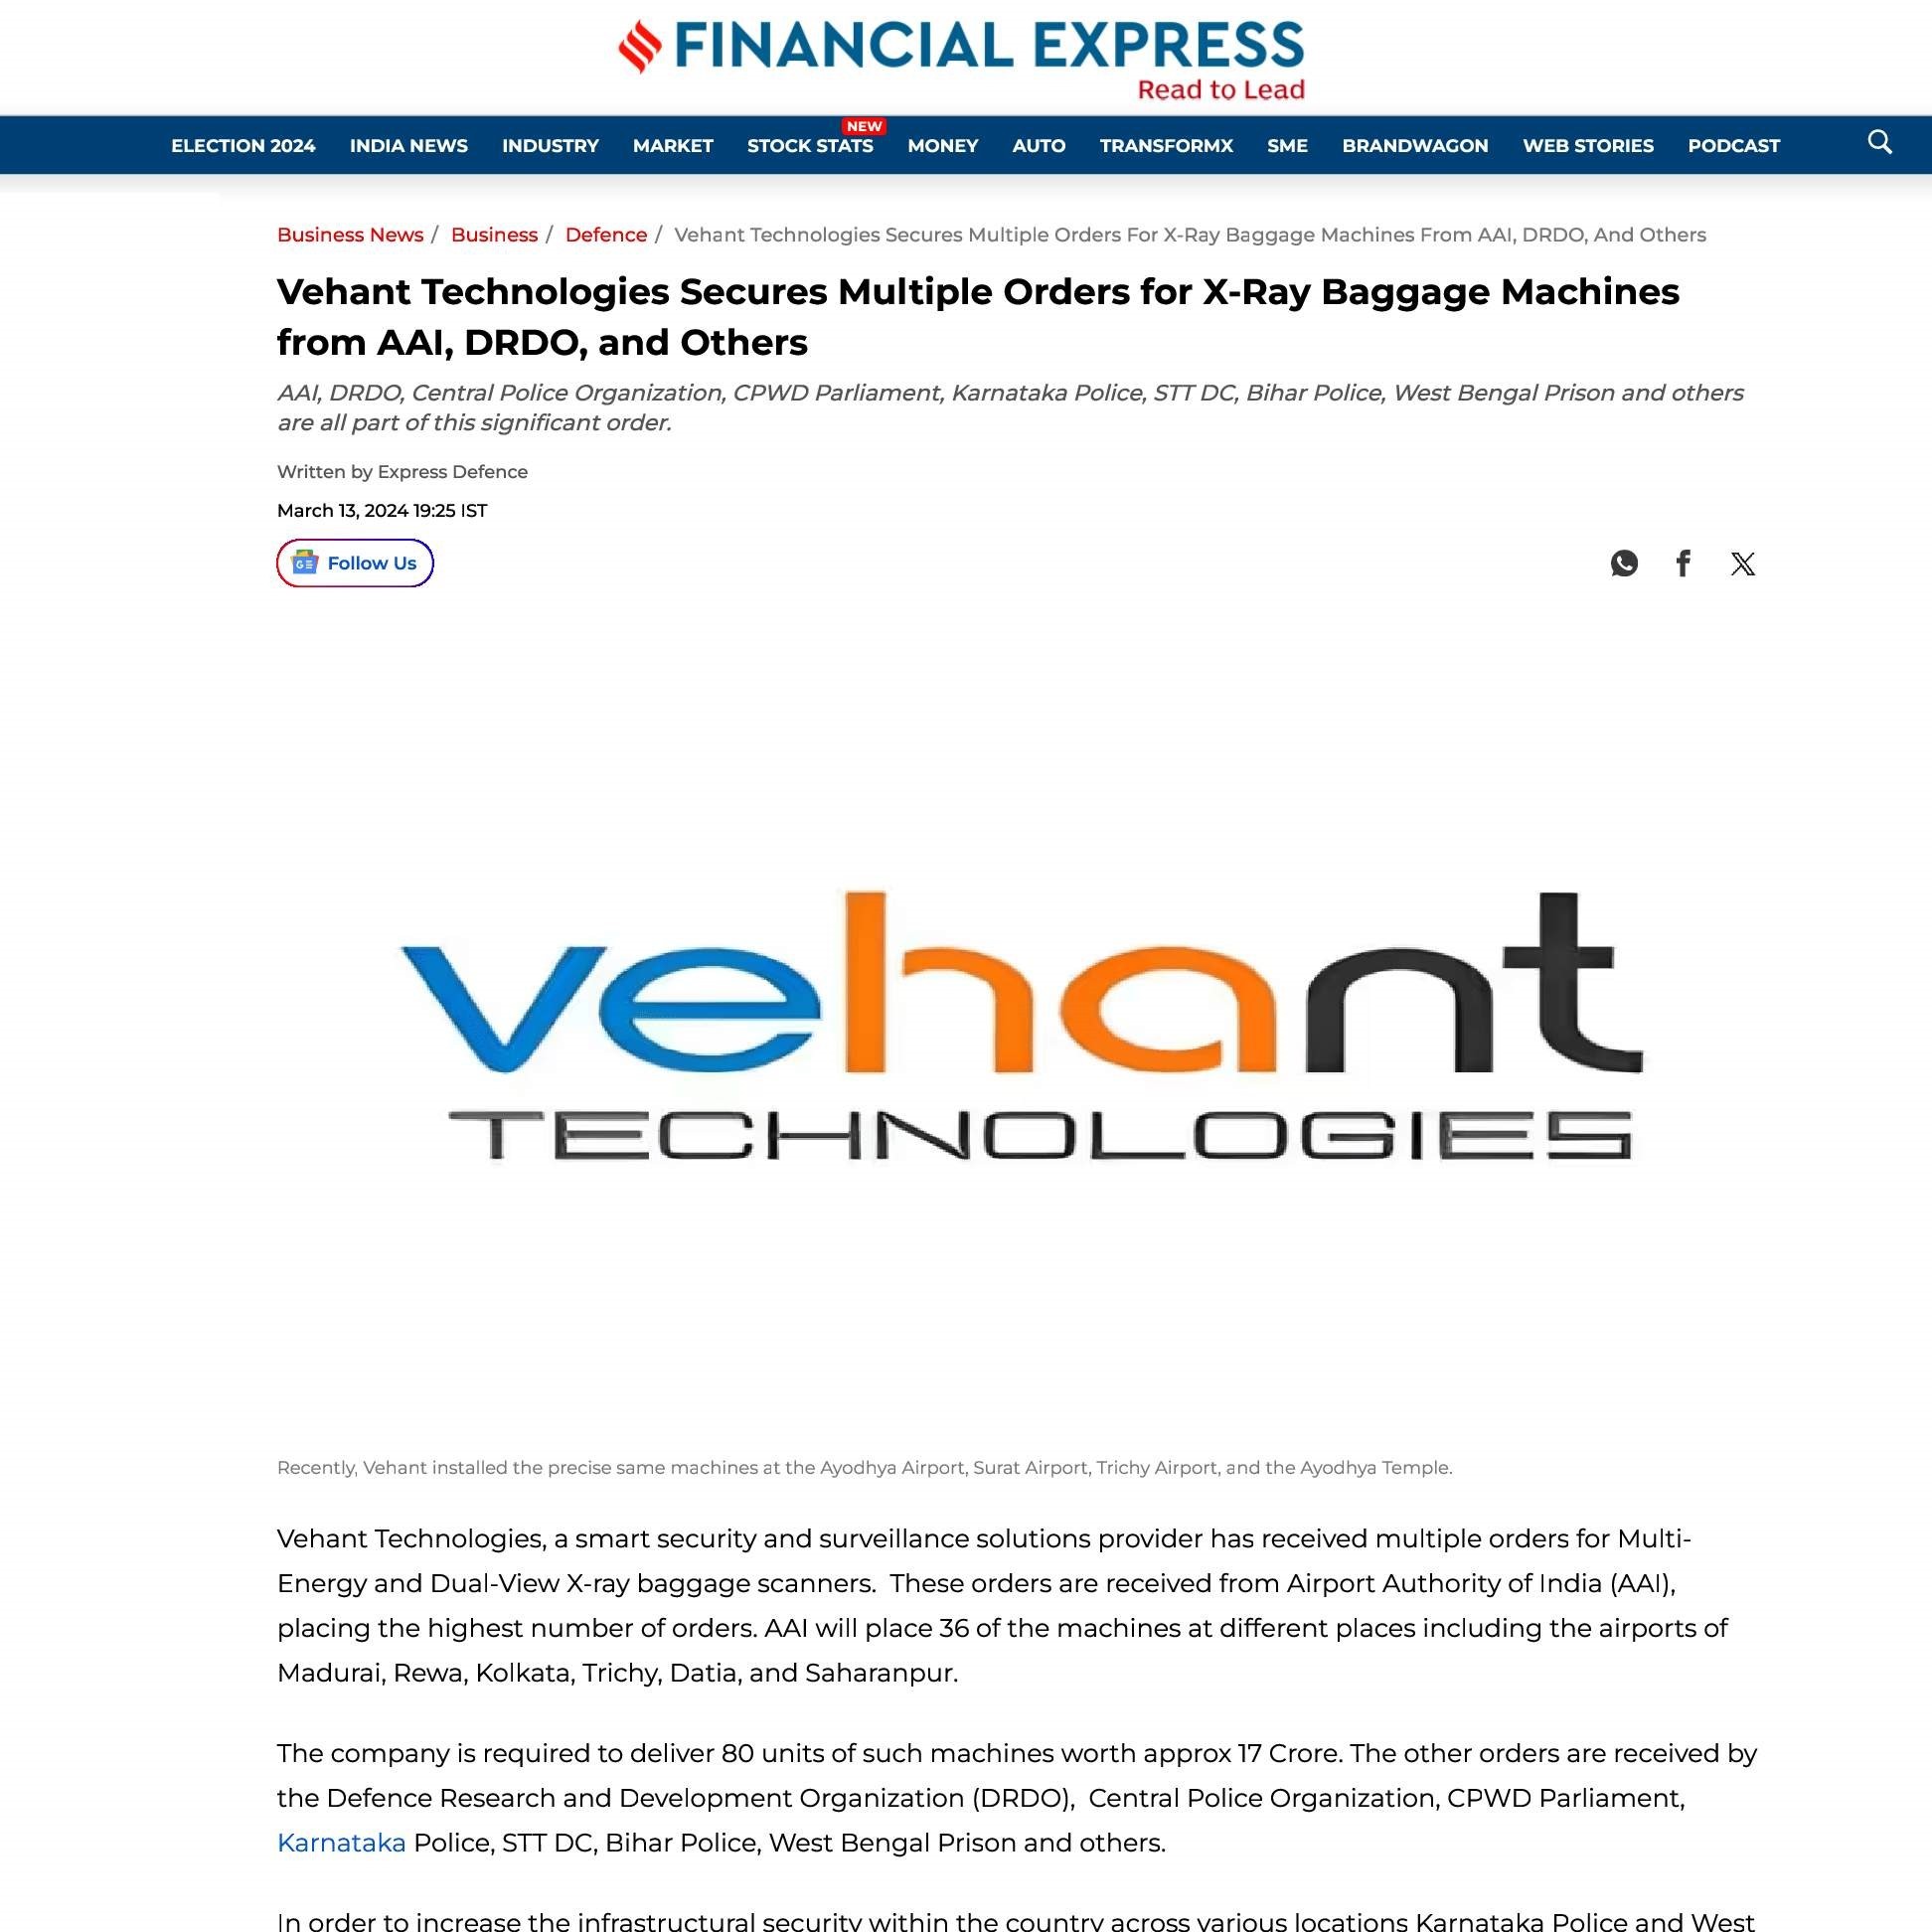 Vehant Technologies Secures Multiple Orders for X-Ray Baggage Machines from AAI, DRDO, and Others